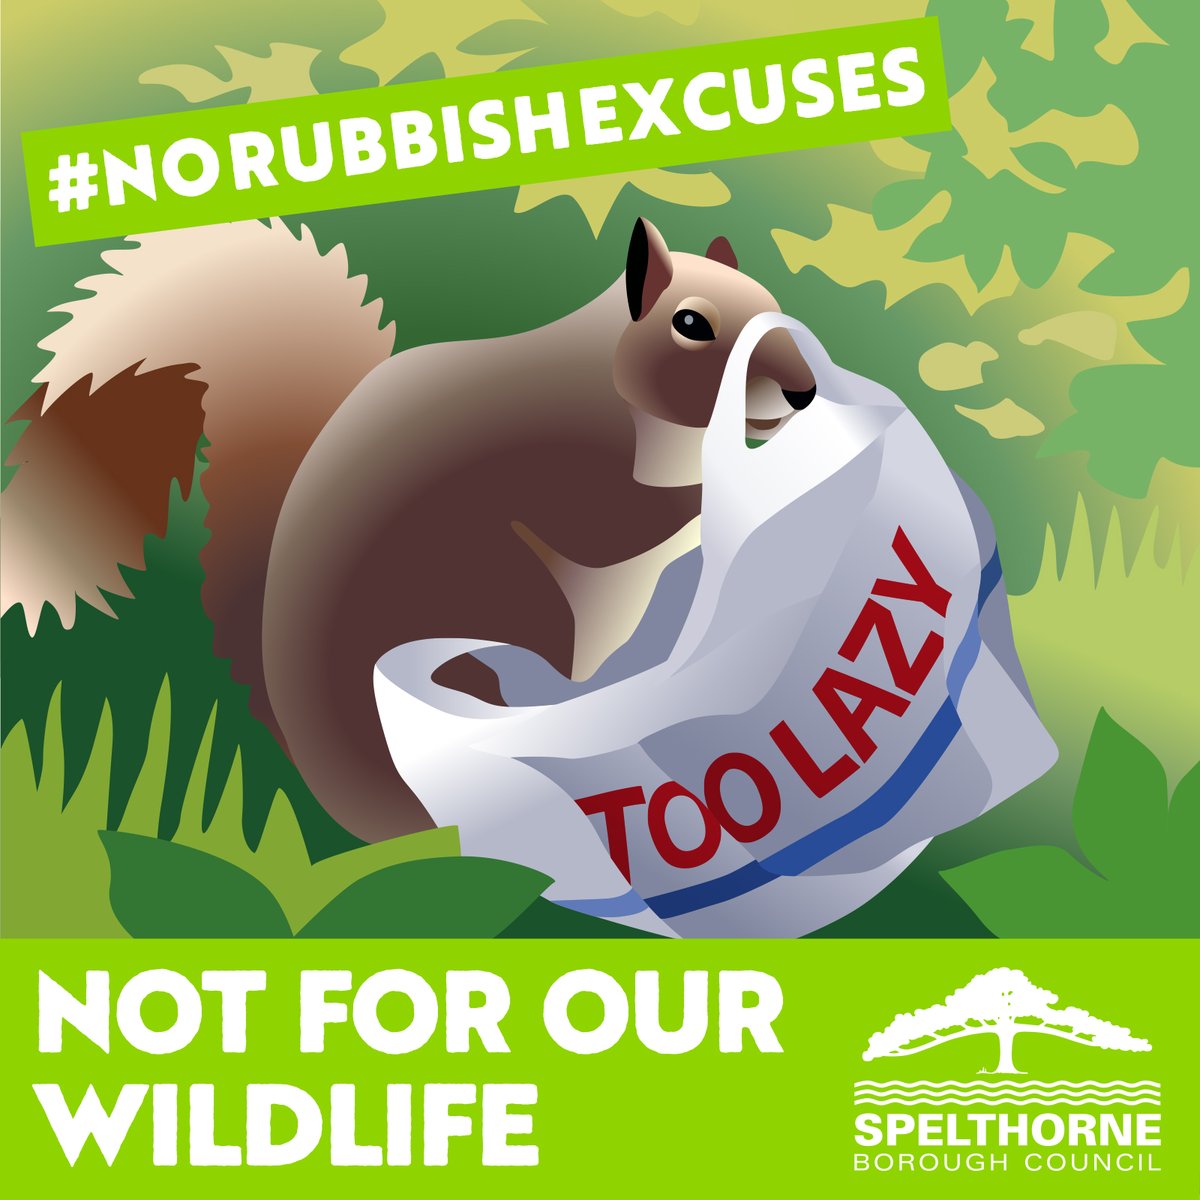 The wildlife we have in Spelthorne is wonderful and we must do everything we can to protect and cherish it, including keeping our Borough free of litter.

Please take your litter home with you if the bins are full

#NoRubbishExcuses #KeepSpelthorneTidy